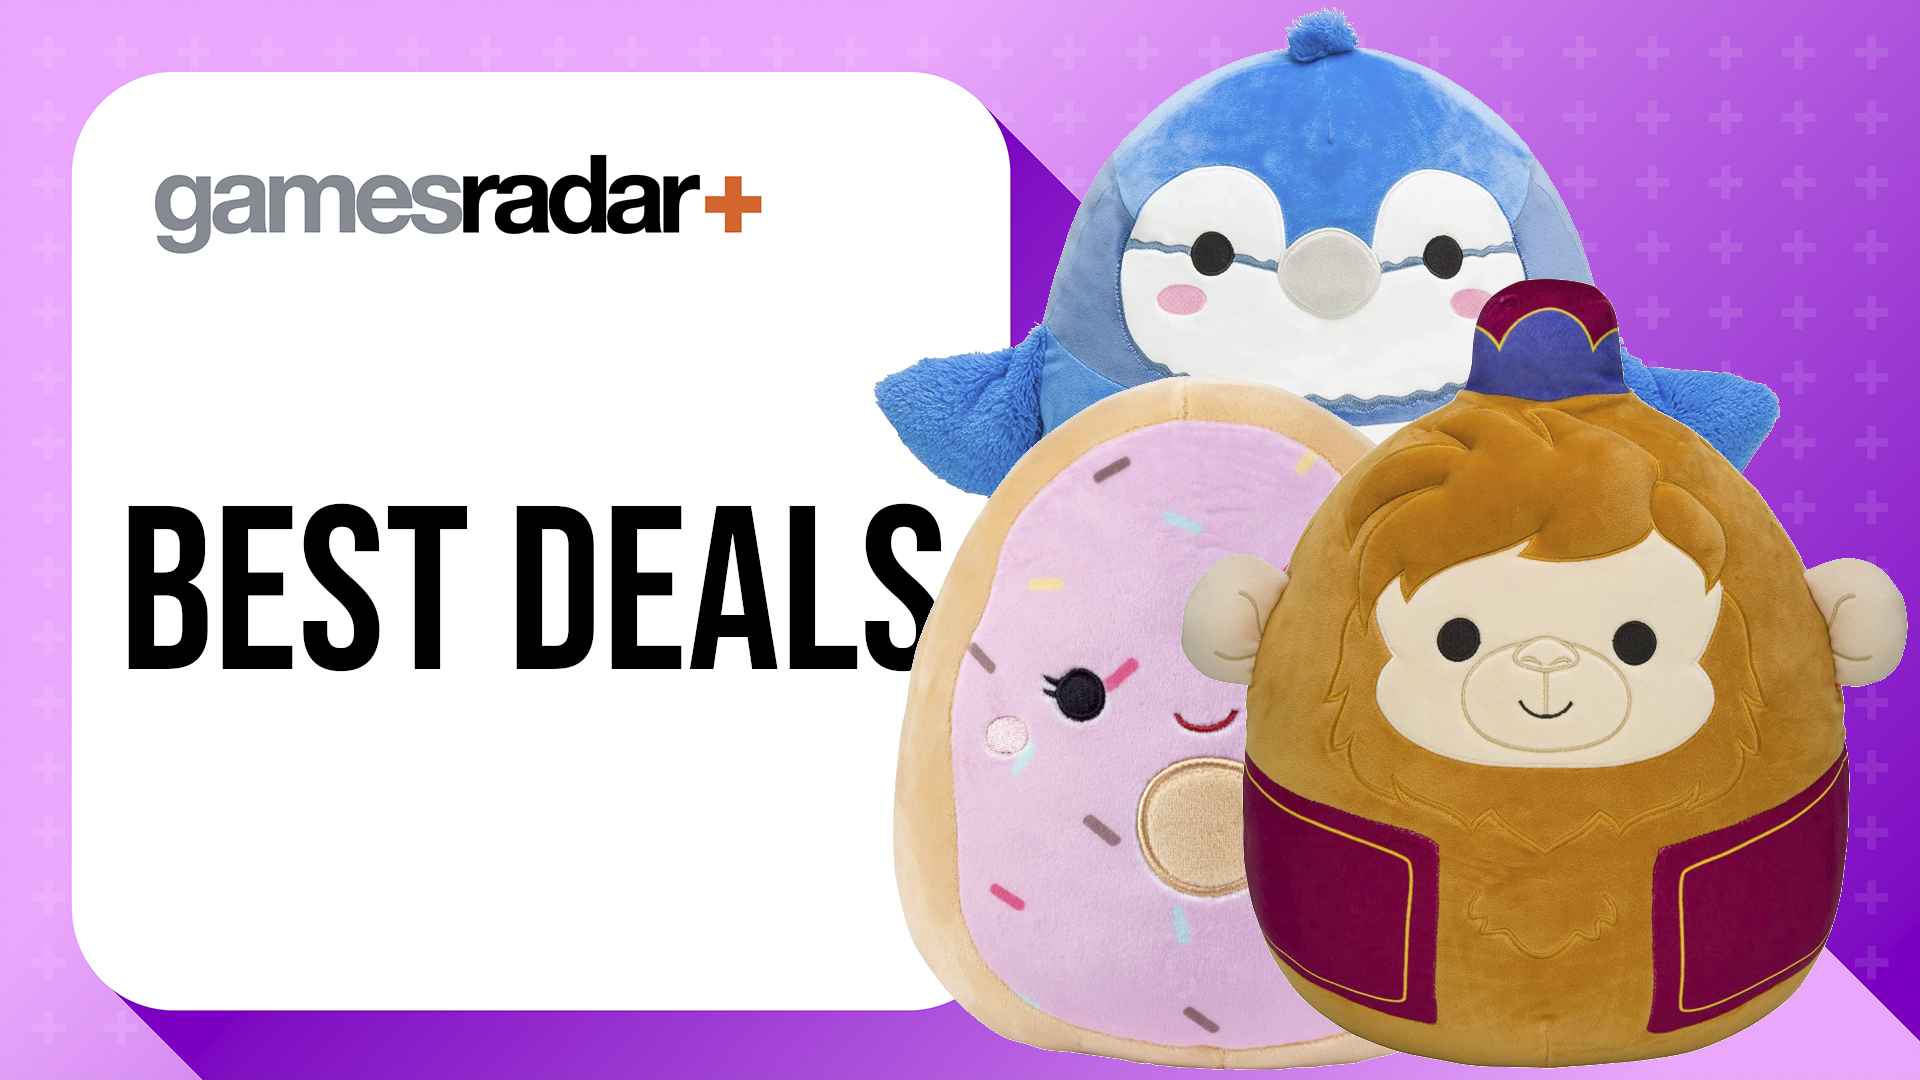 Black Friday toy deals with Squishmallows